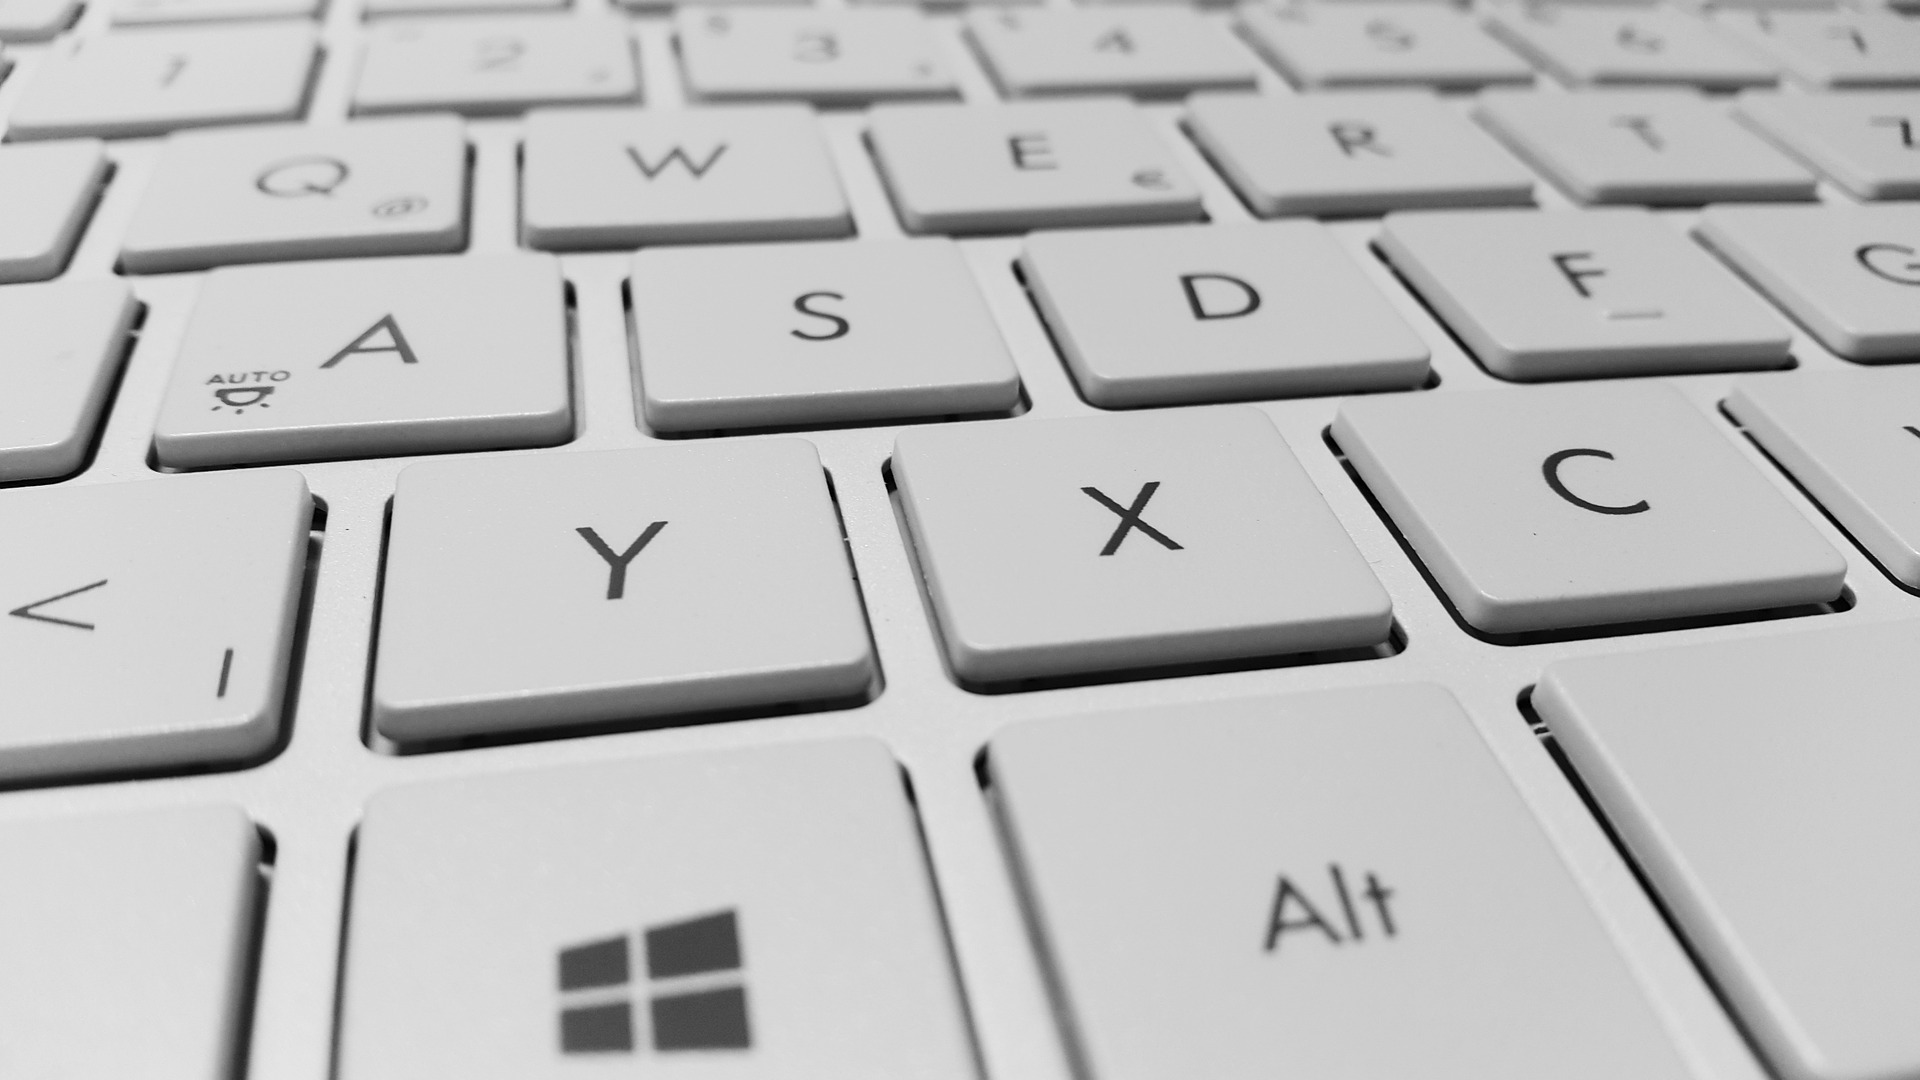 A zoomed-in shot shows keys on a white keyboard.